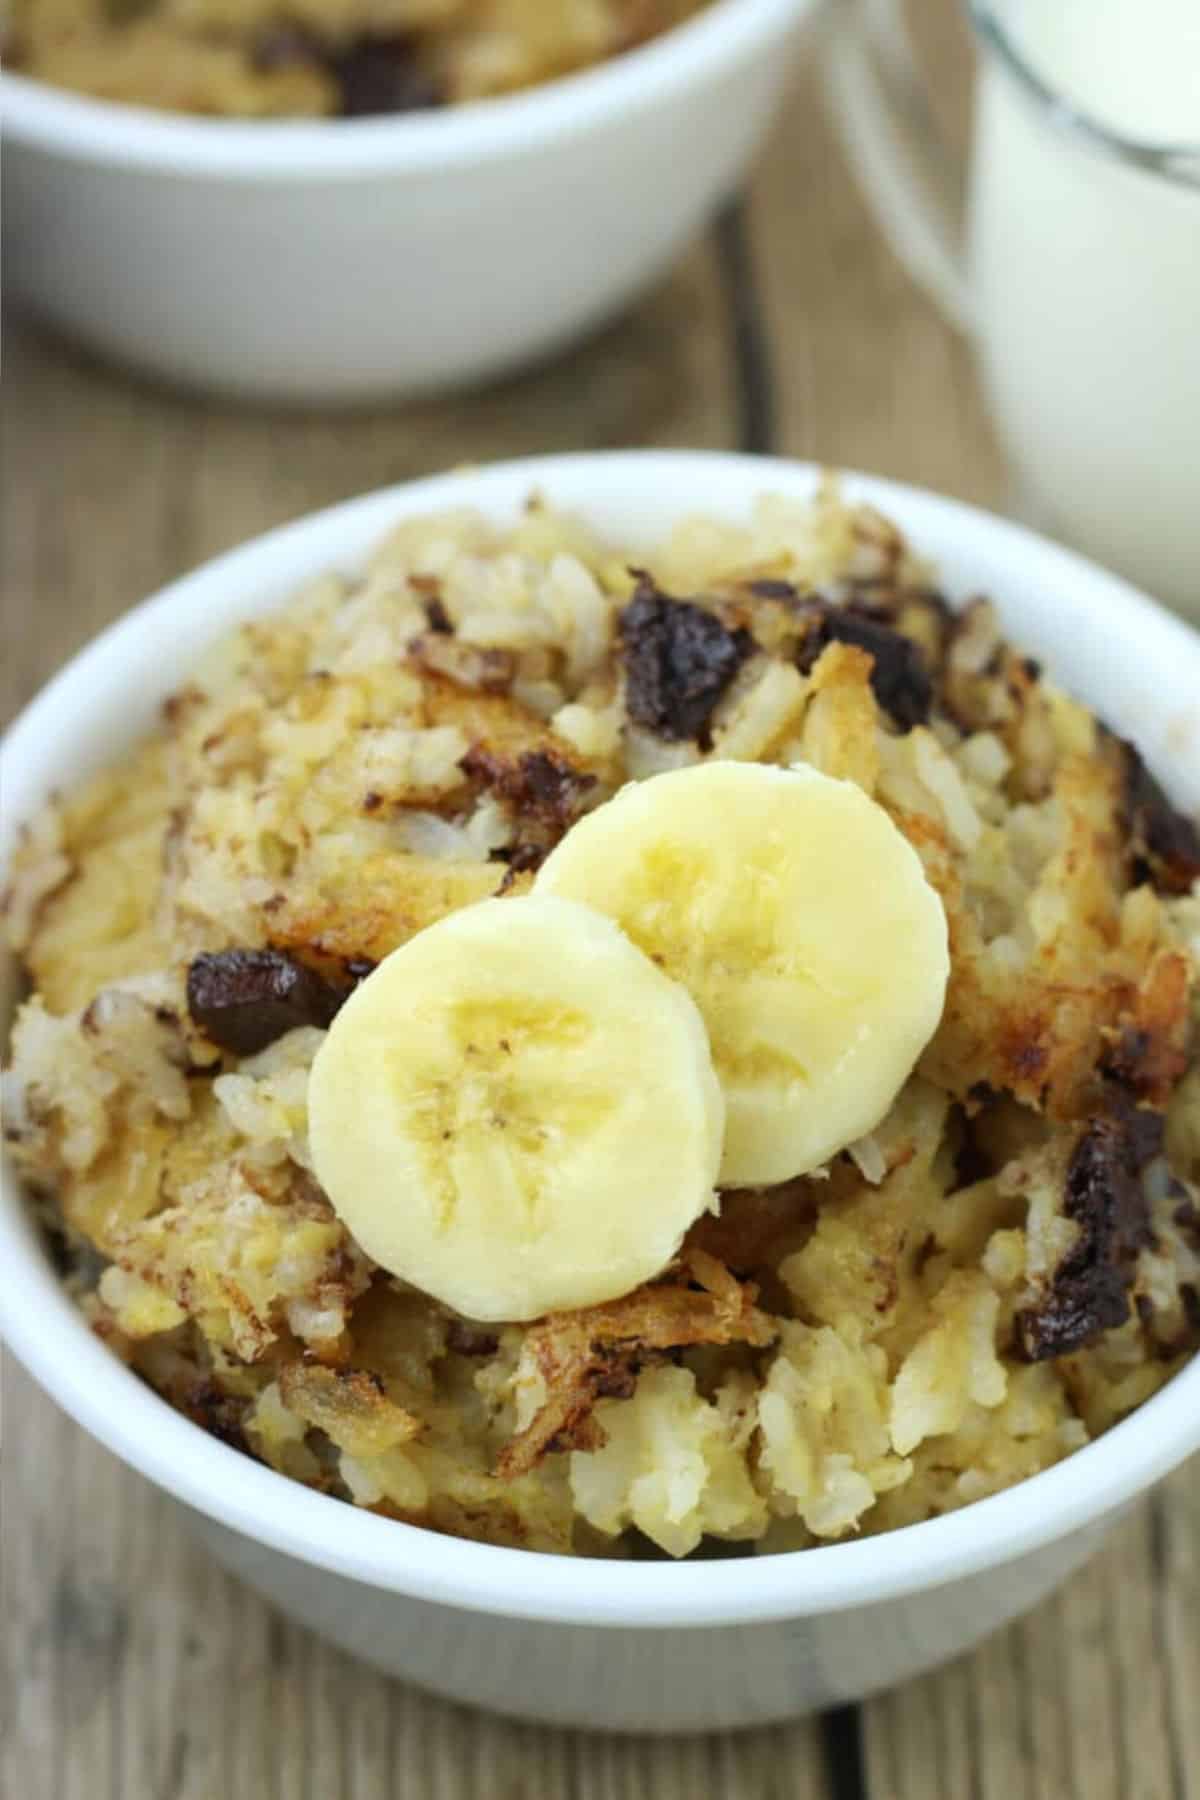 Close up image of rice pudding with banana slices.